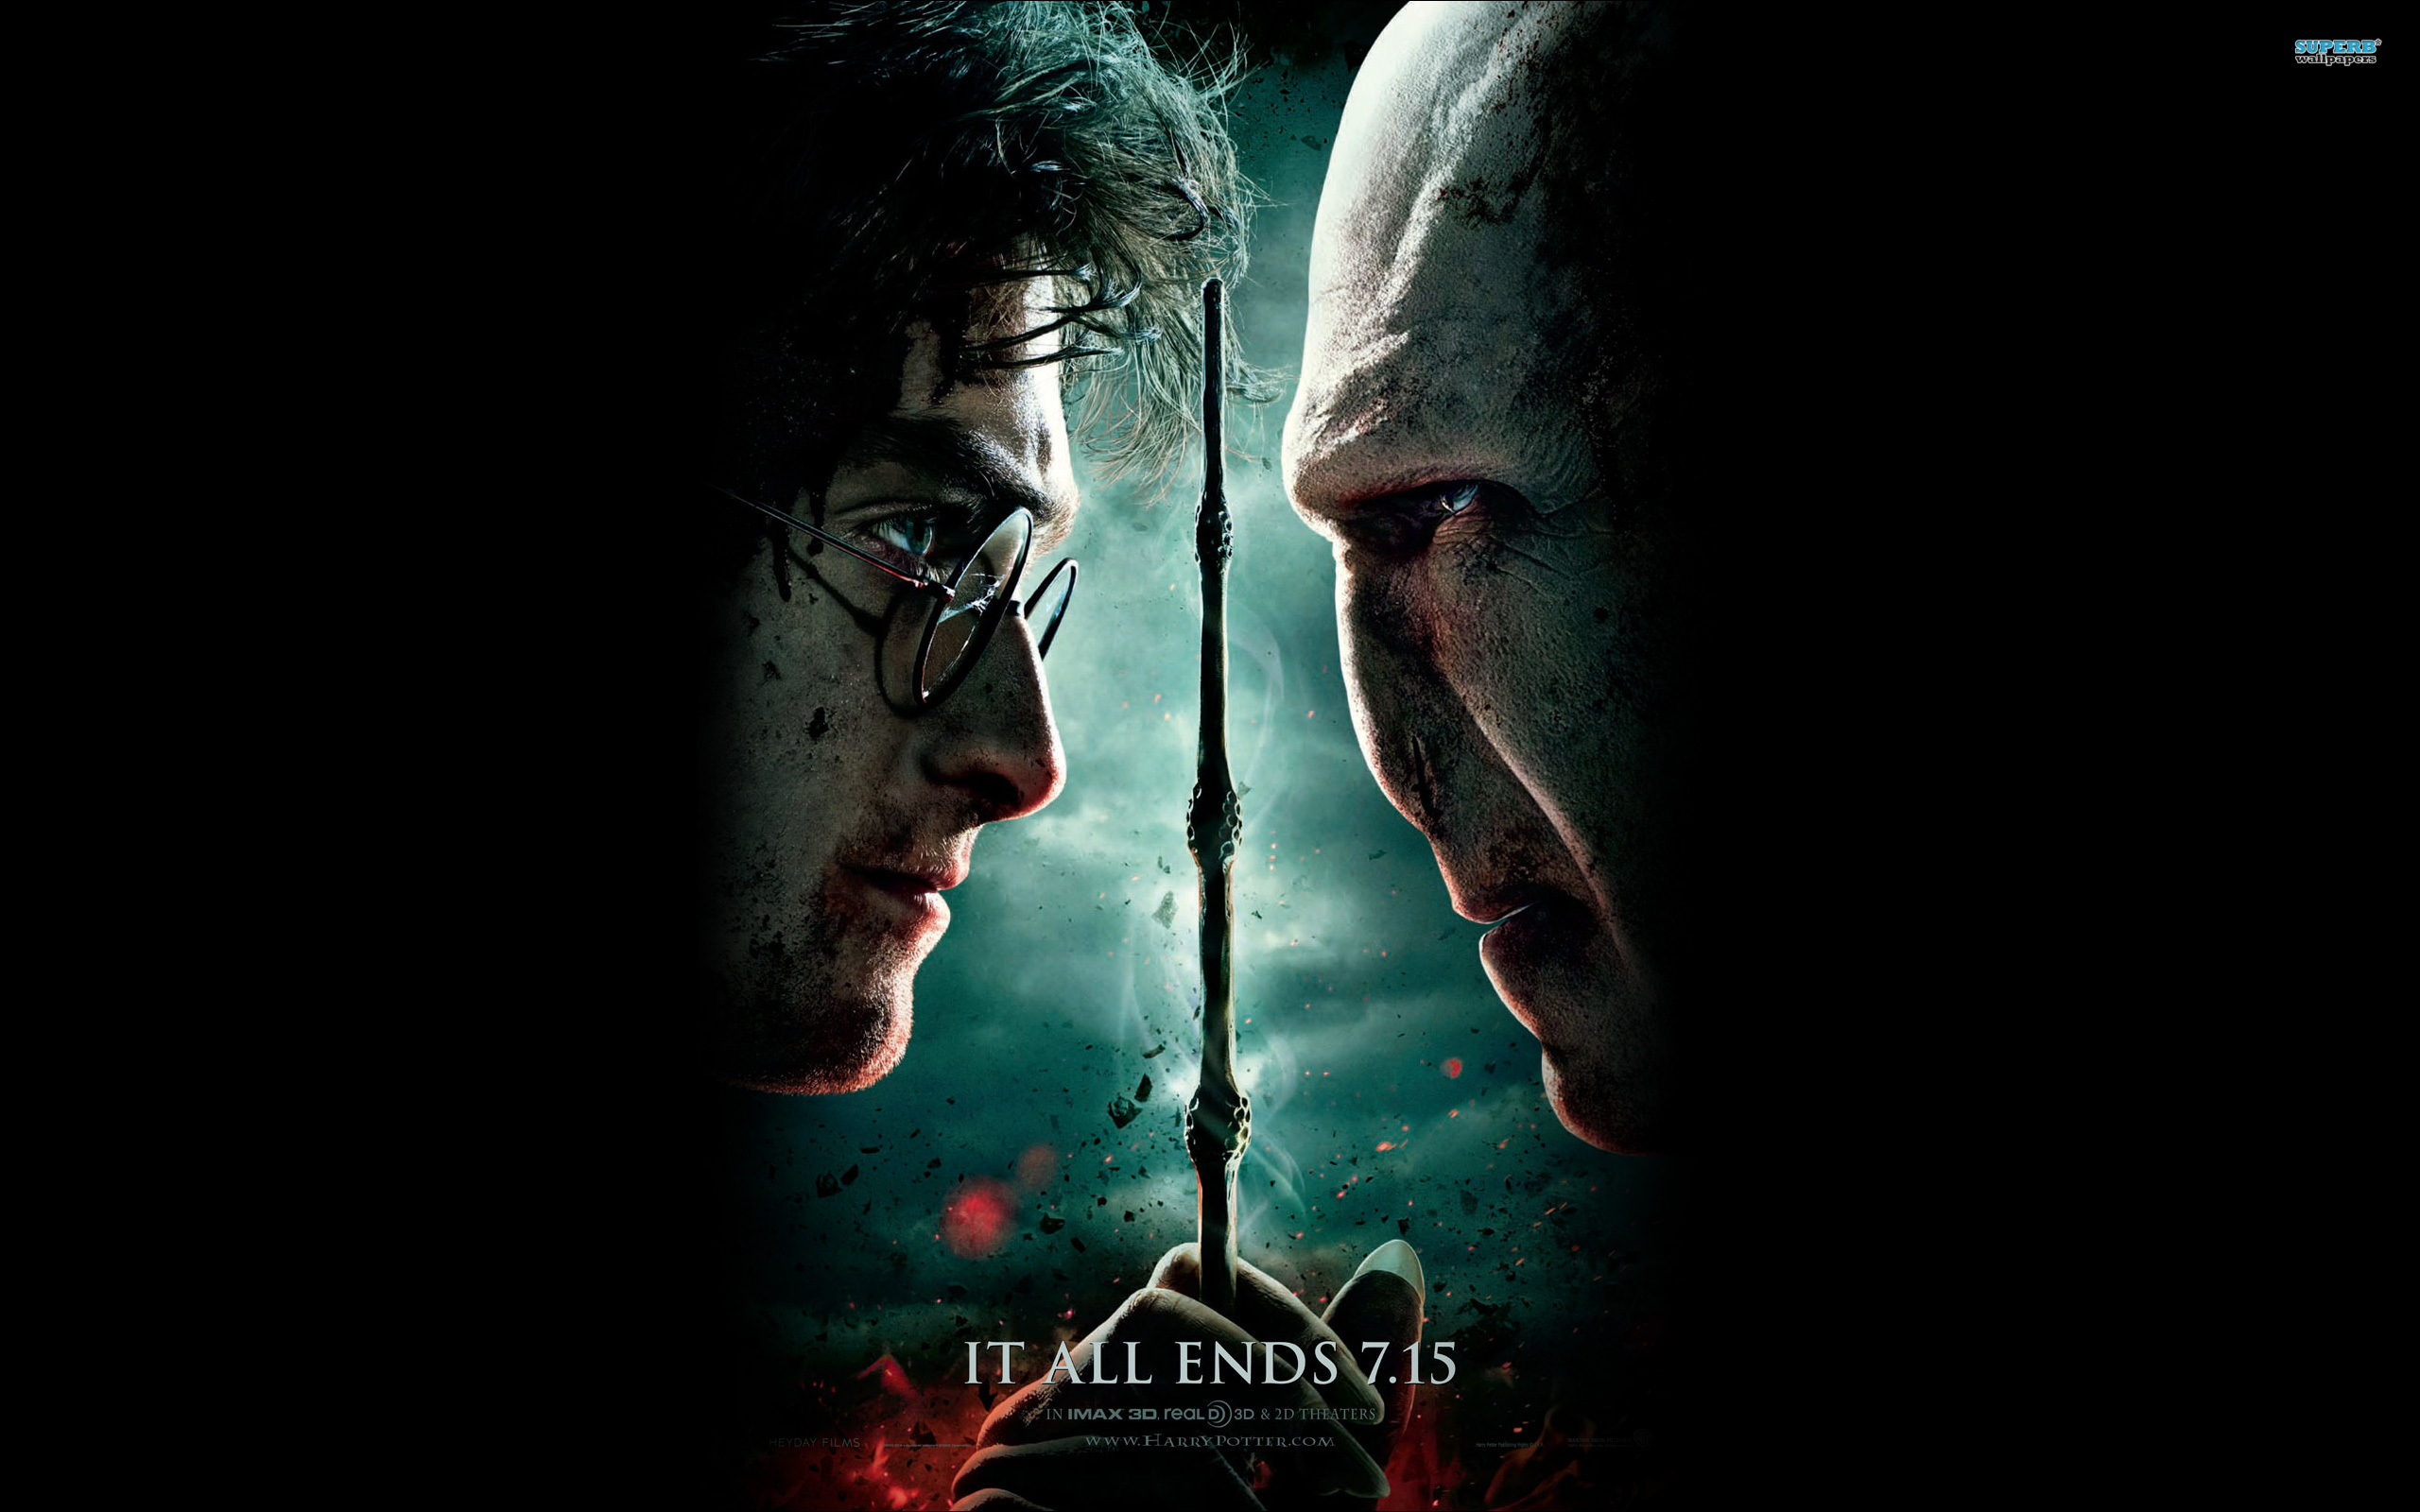 Harry Potter and the Deathly Hallows wallpaper - Movie wallpapers